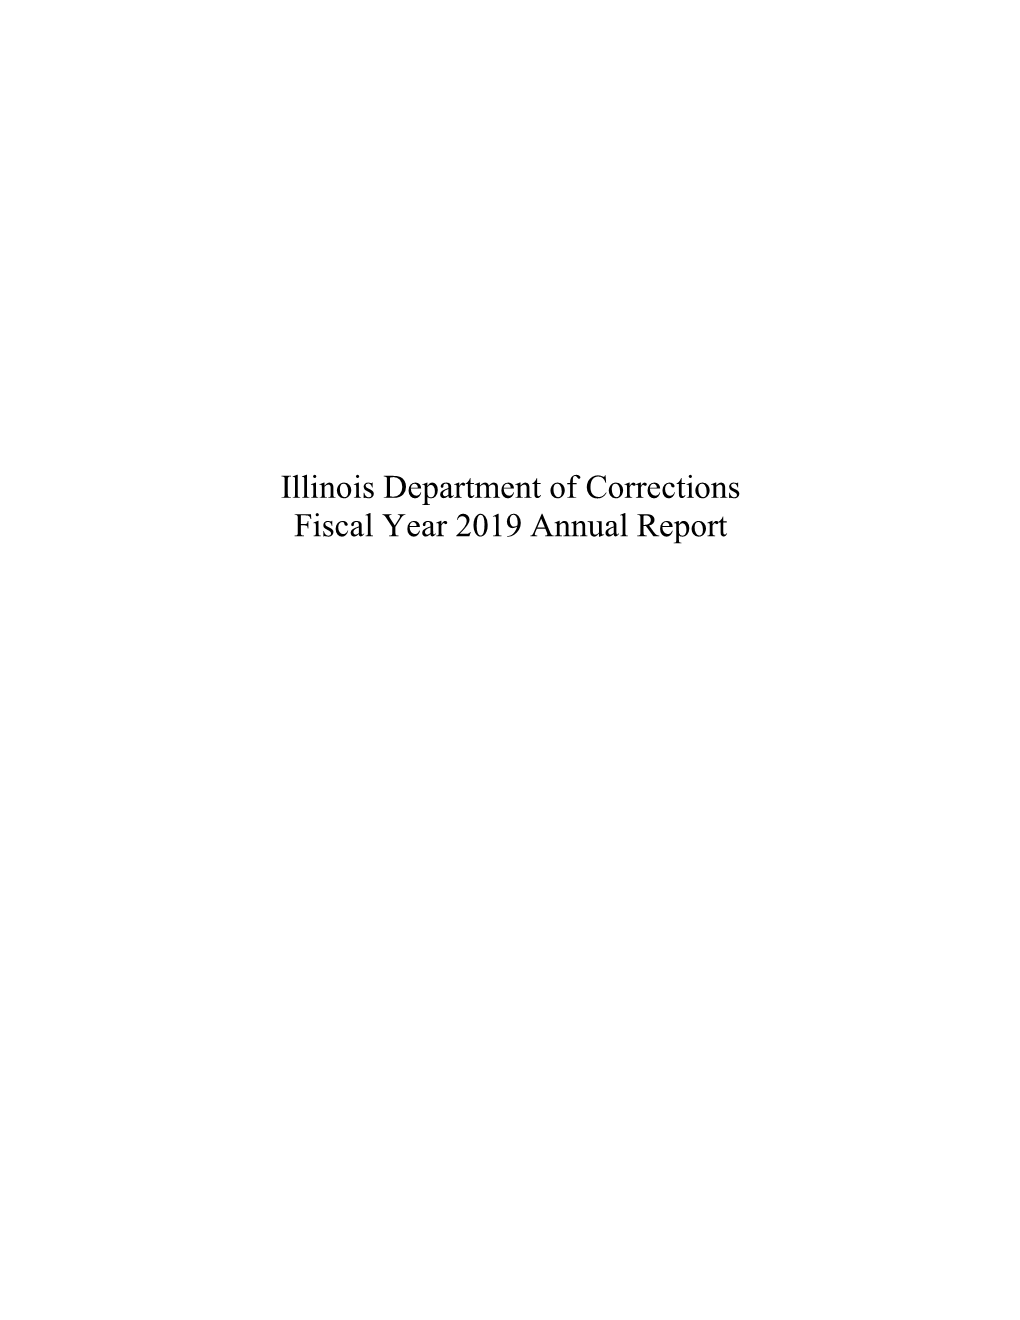 Illinois Department of Corrections Fiscal Year 2019 Annual Report